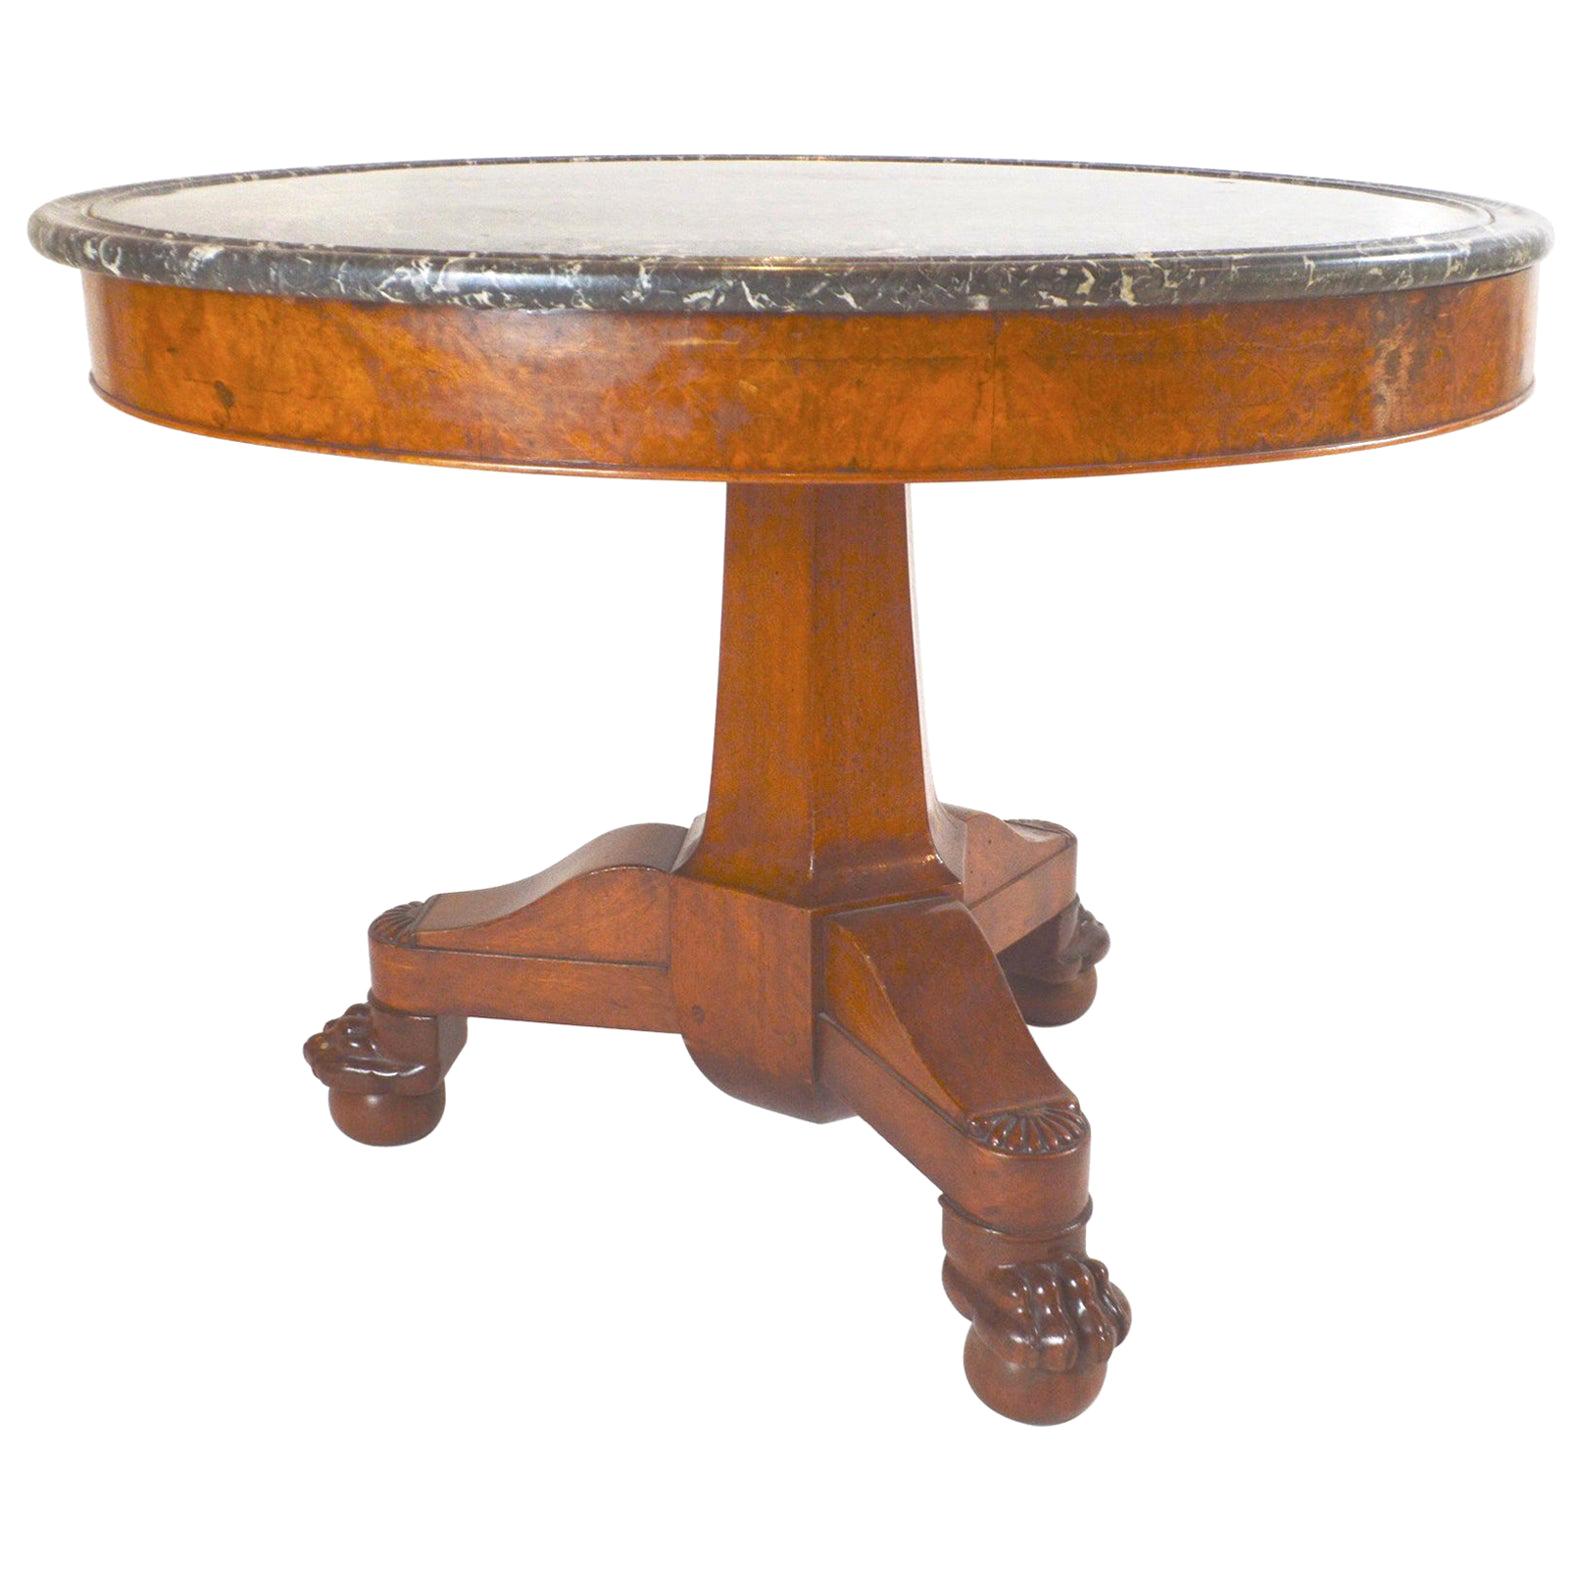 19th century French Empire walnut center or dining table with bun feet marble top.